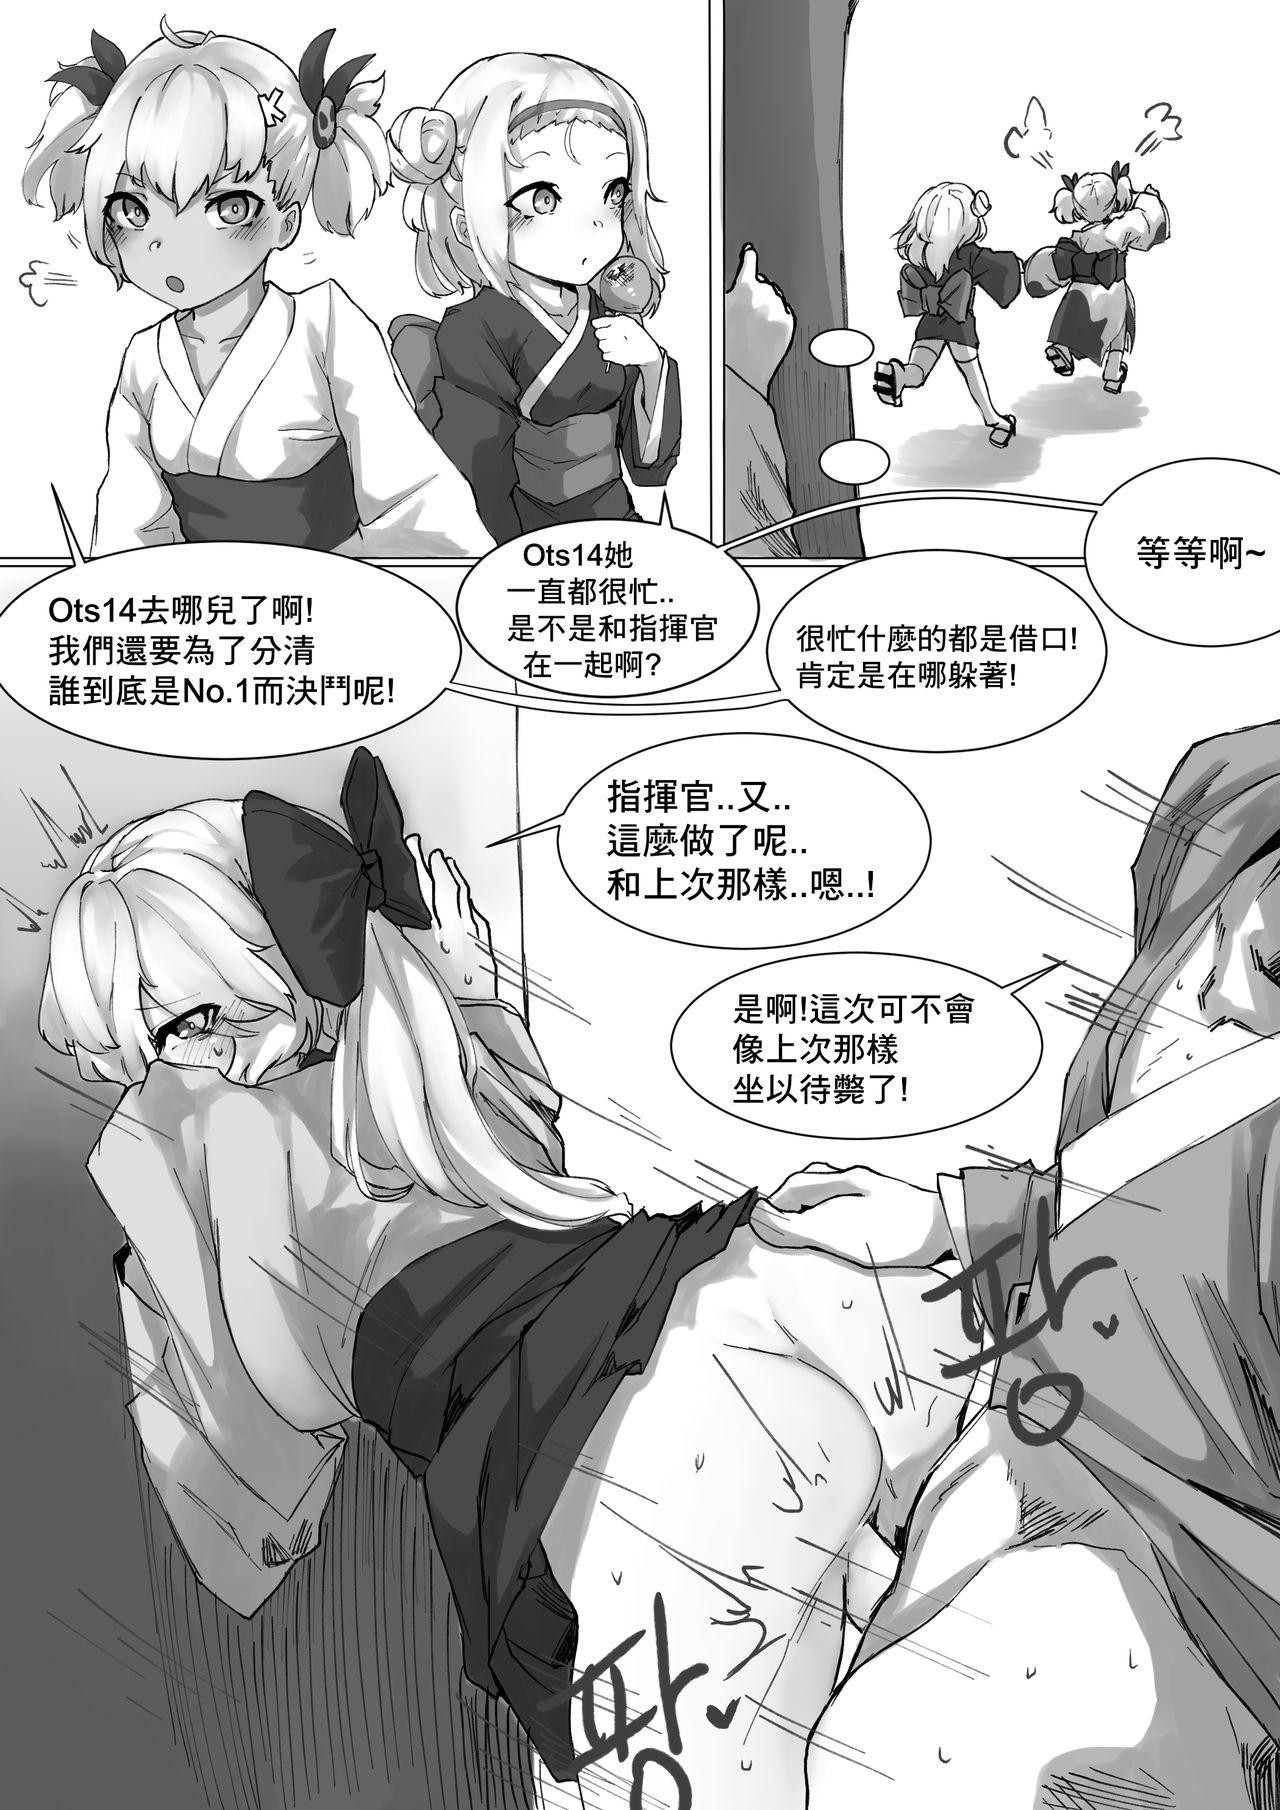 Dyke How To Use OTS-14 - Girls frontline Anal Creampie - Page 10